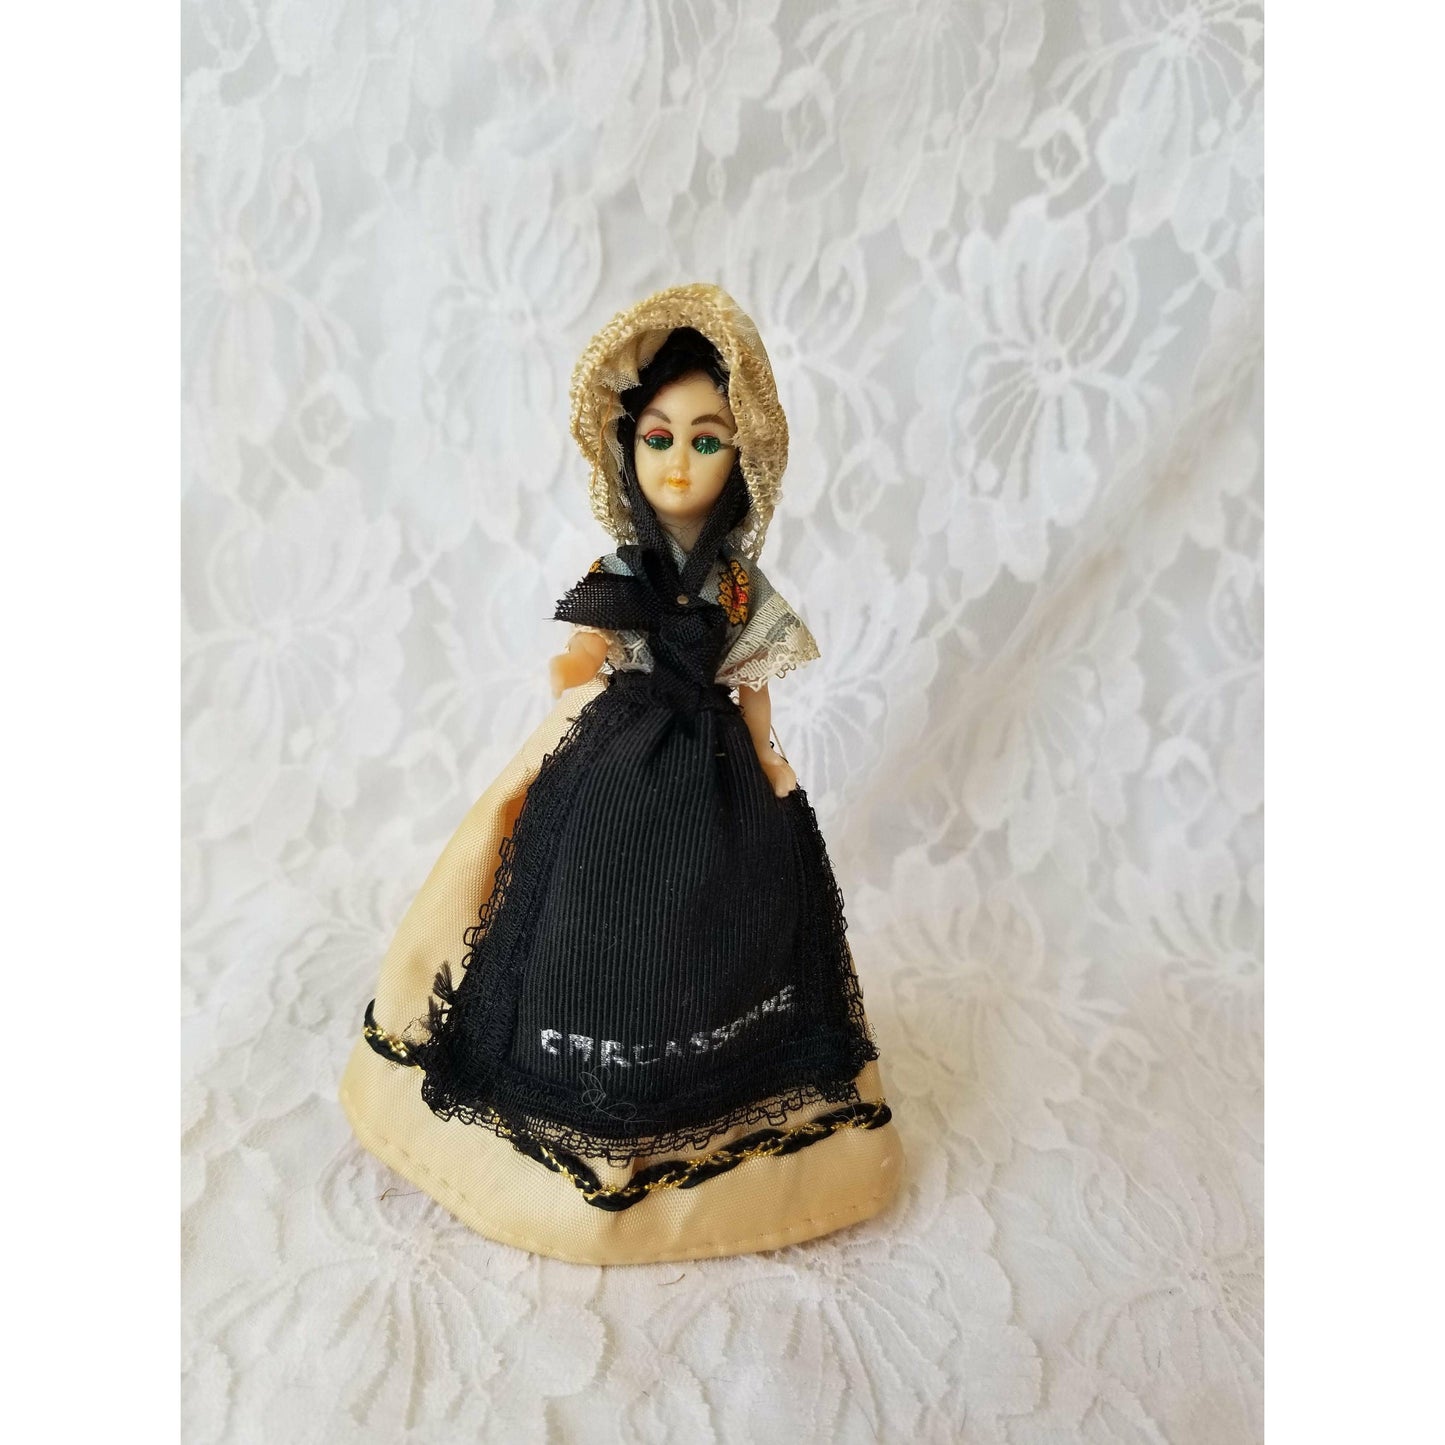 Dollhouse Miniature Jointed Souvenir Doll 5" ~ FRANCE 5 Inch Doll ~ French ~ 1950's ~ Celluloid ~ Jointed